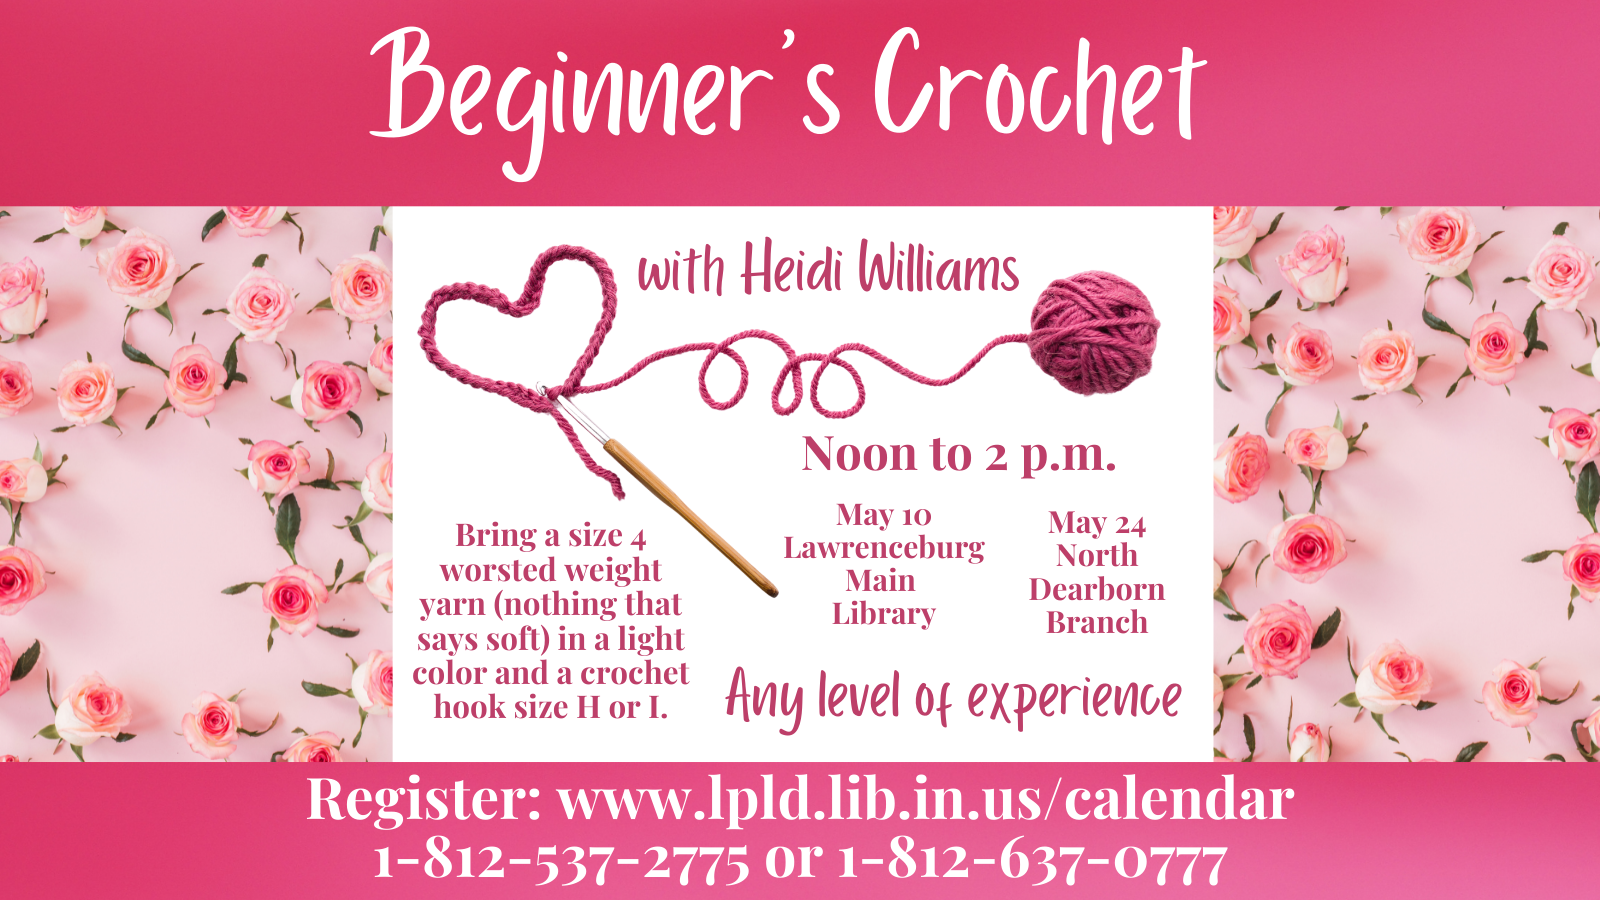 Beginner's Crochet. Noon Tuesday, May 10, Lawrenceburg Main Library. Registration required.